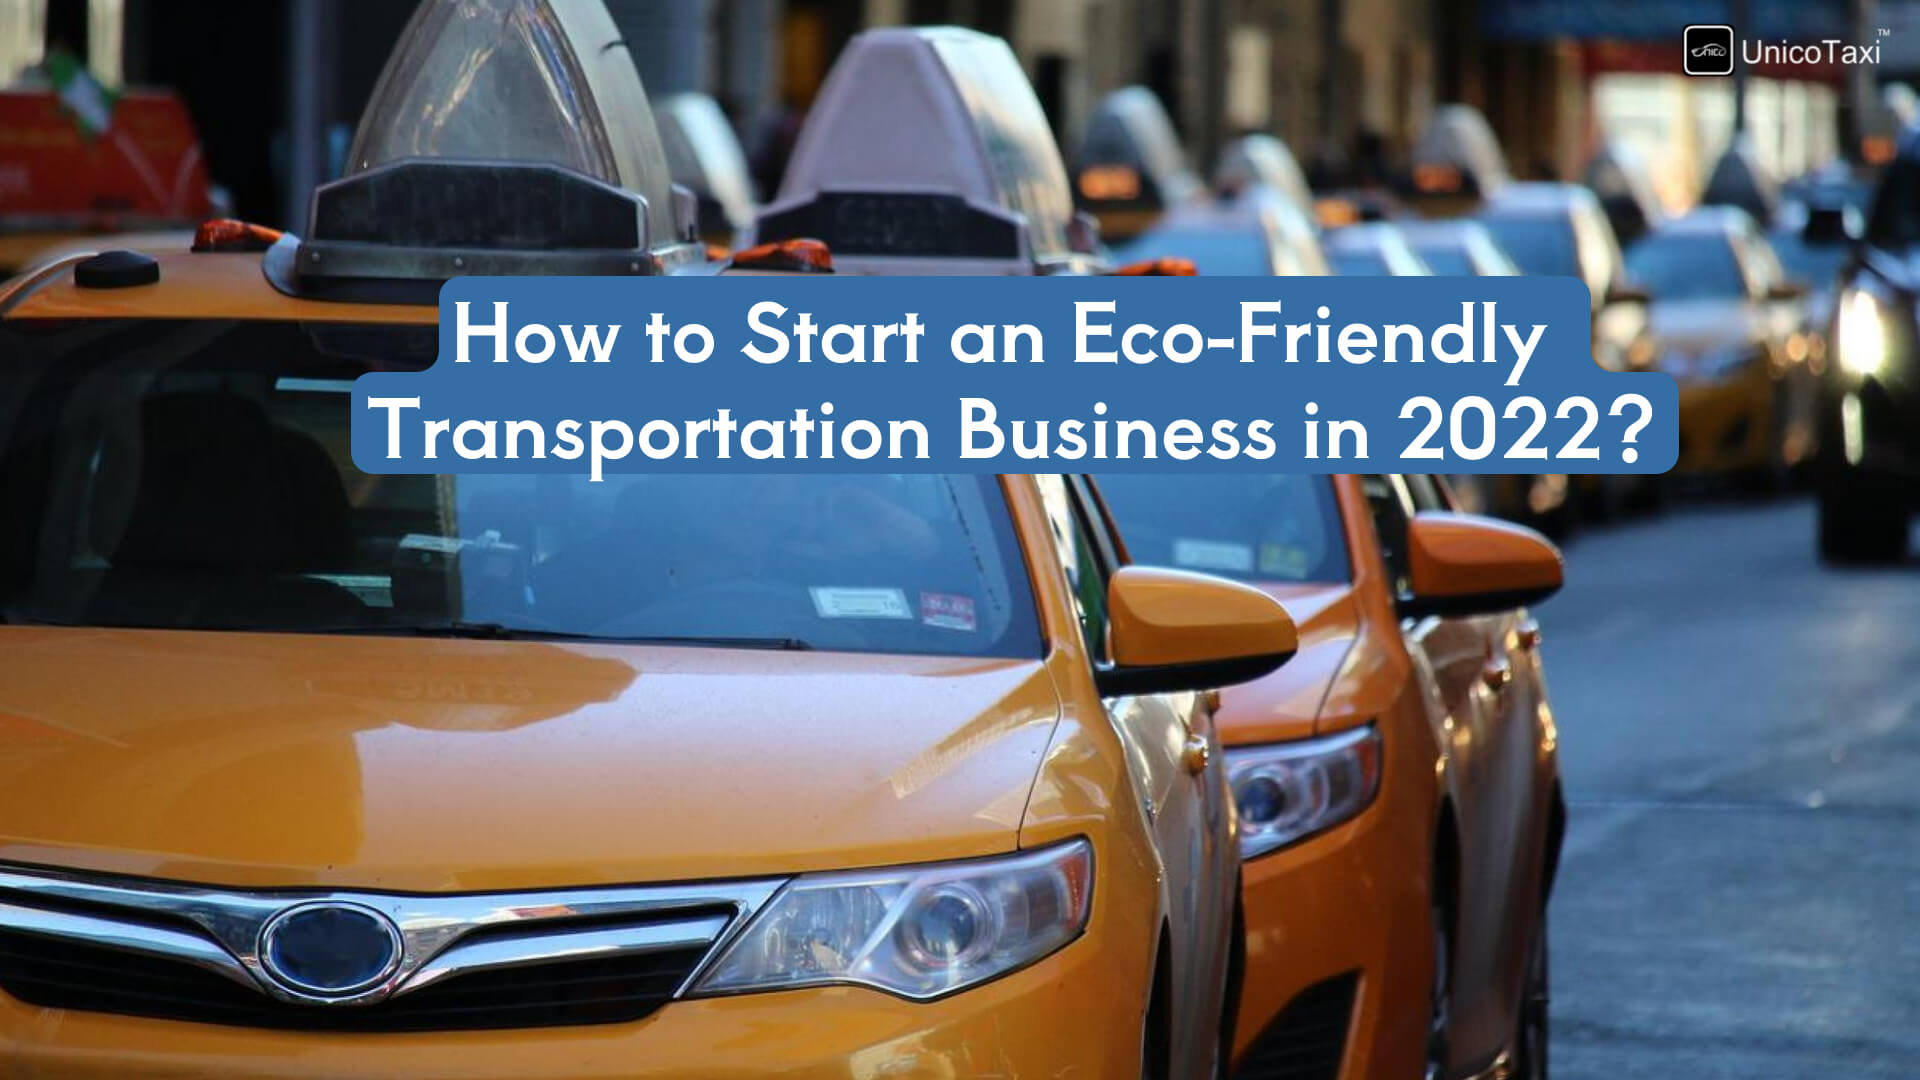 How to Start an Eco-Friendly Transportation Business in 2022?